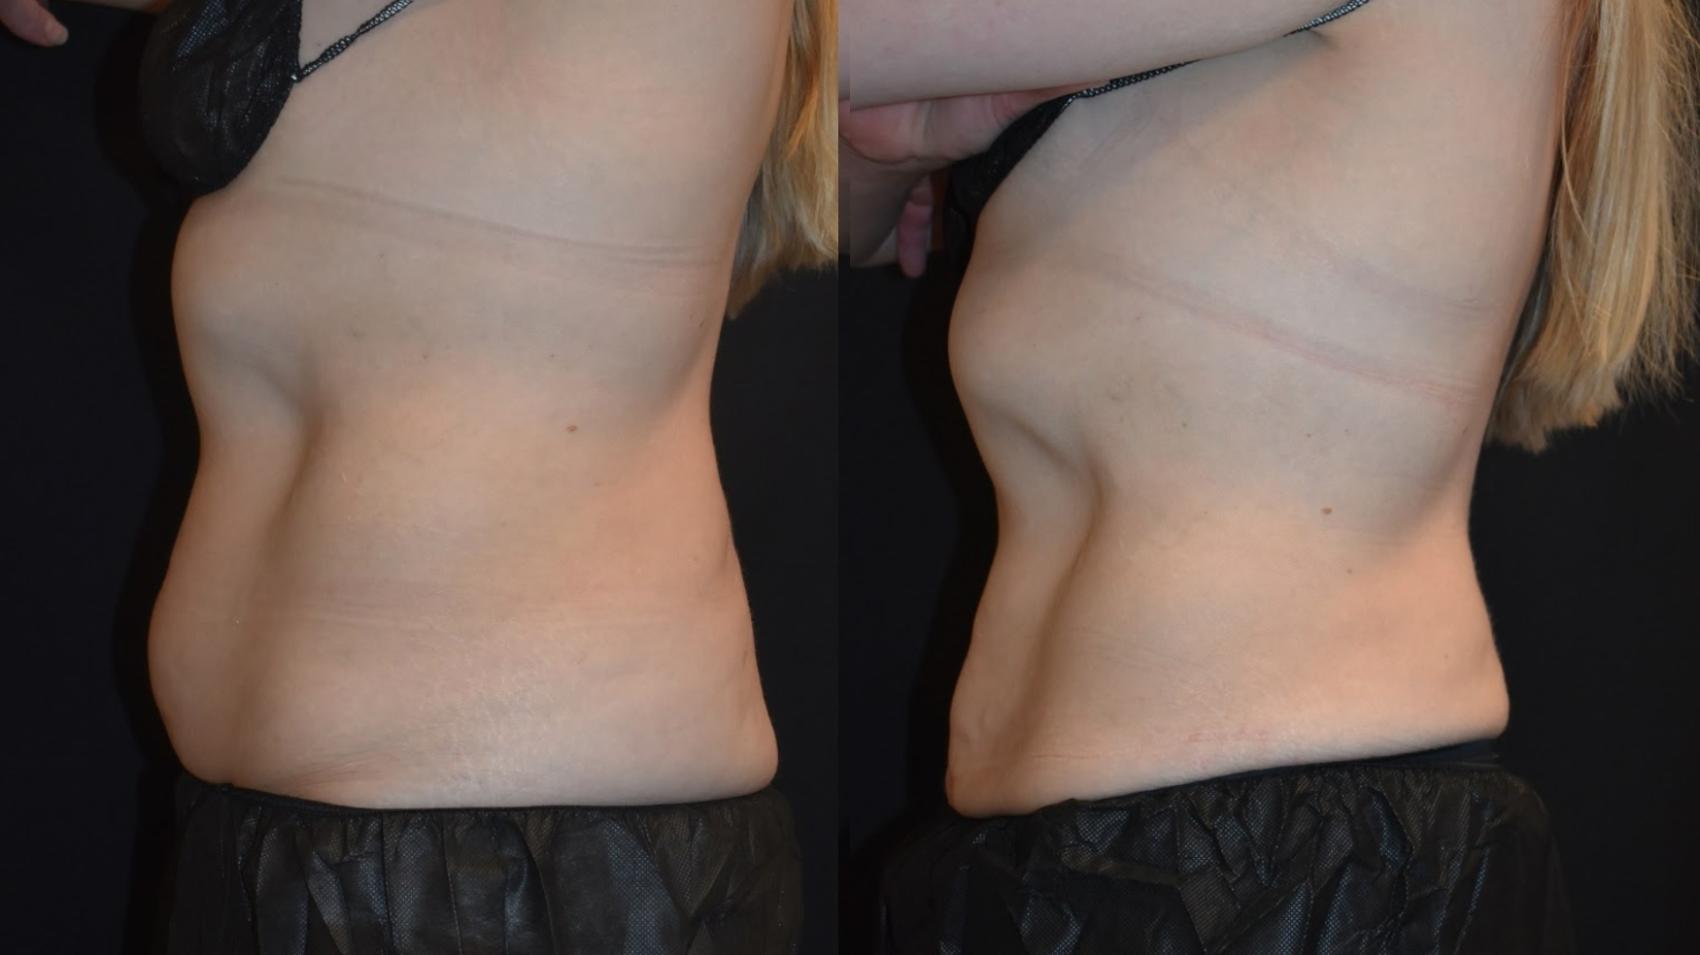 Woman receives coolsculpting treatment for her abdominal area